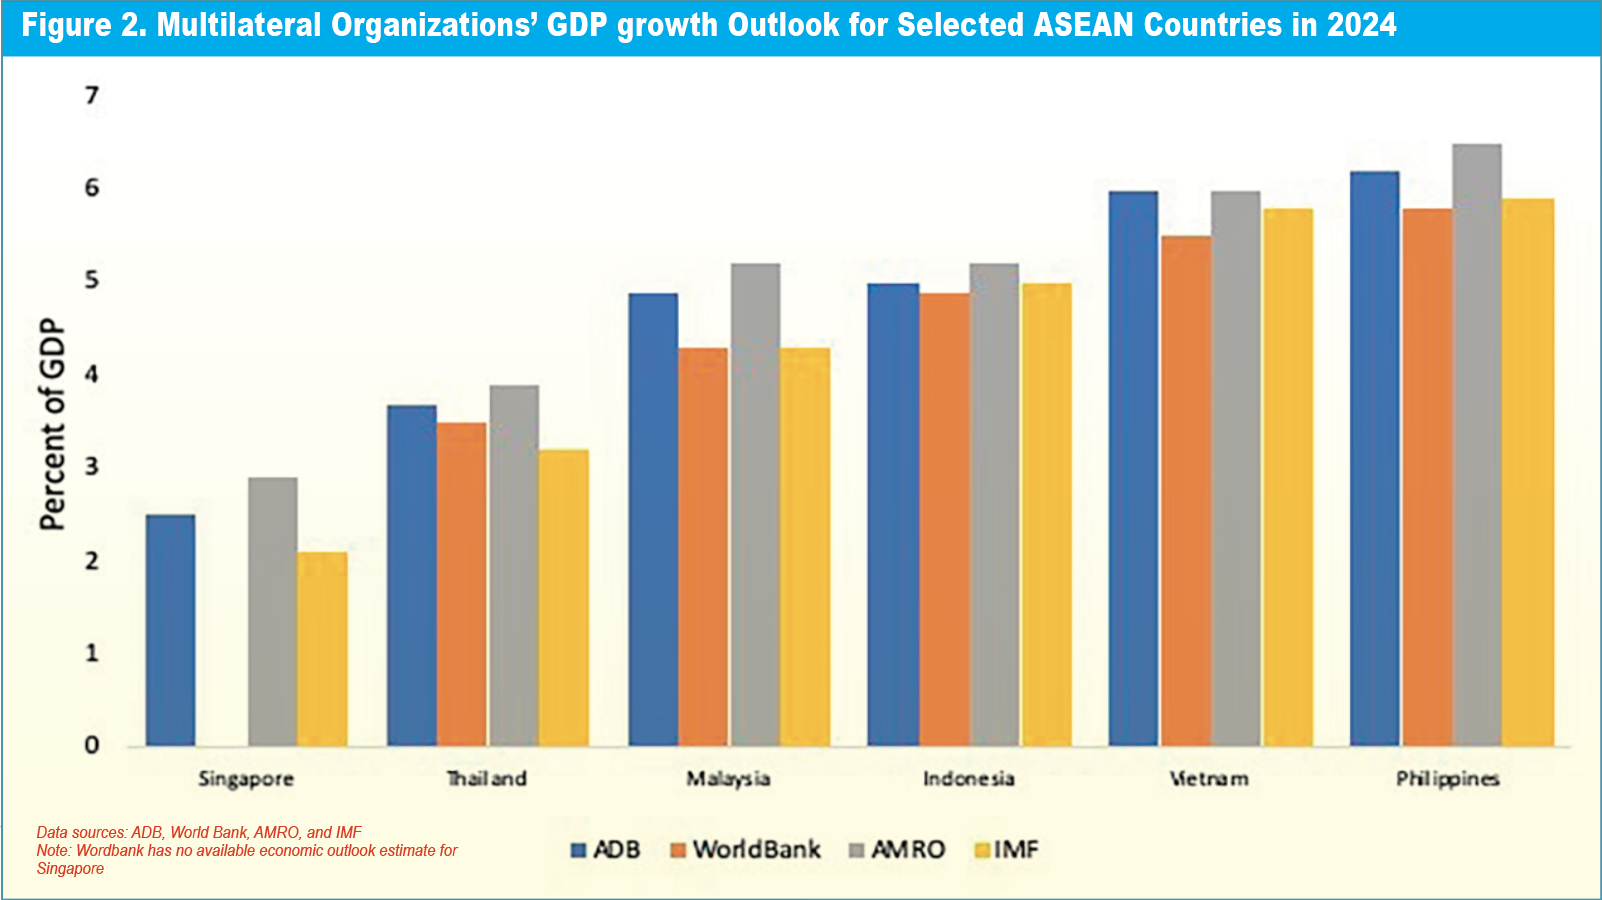 Philippines: Paving the way to a robust economic future